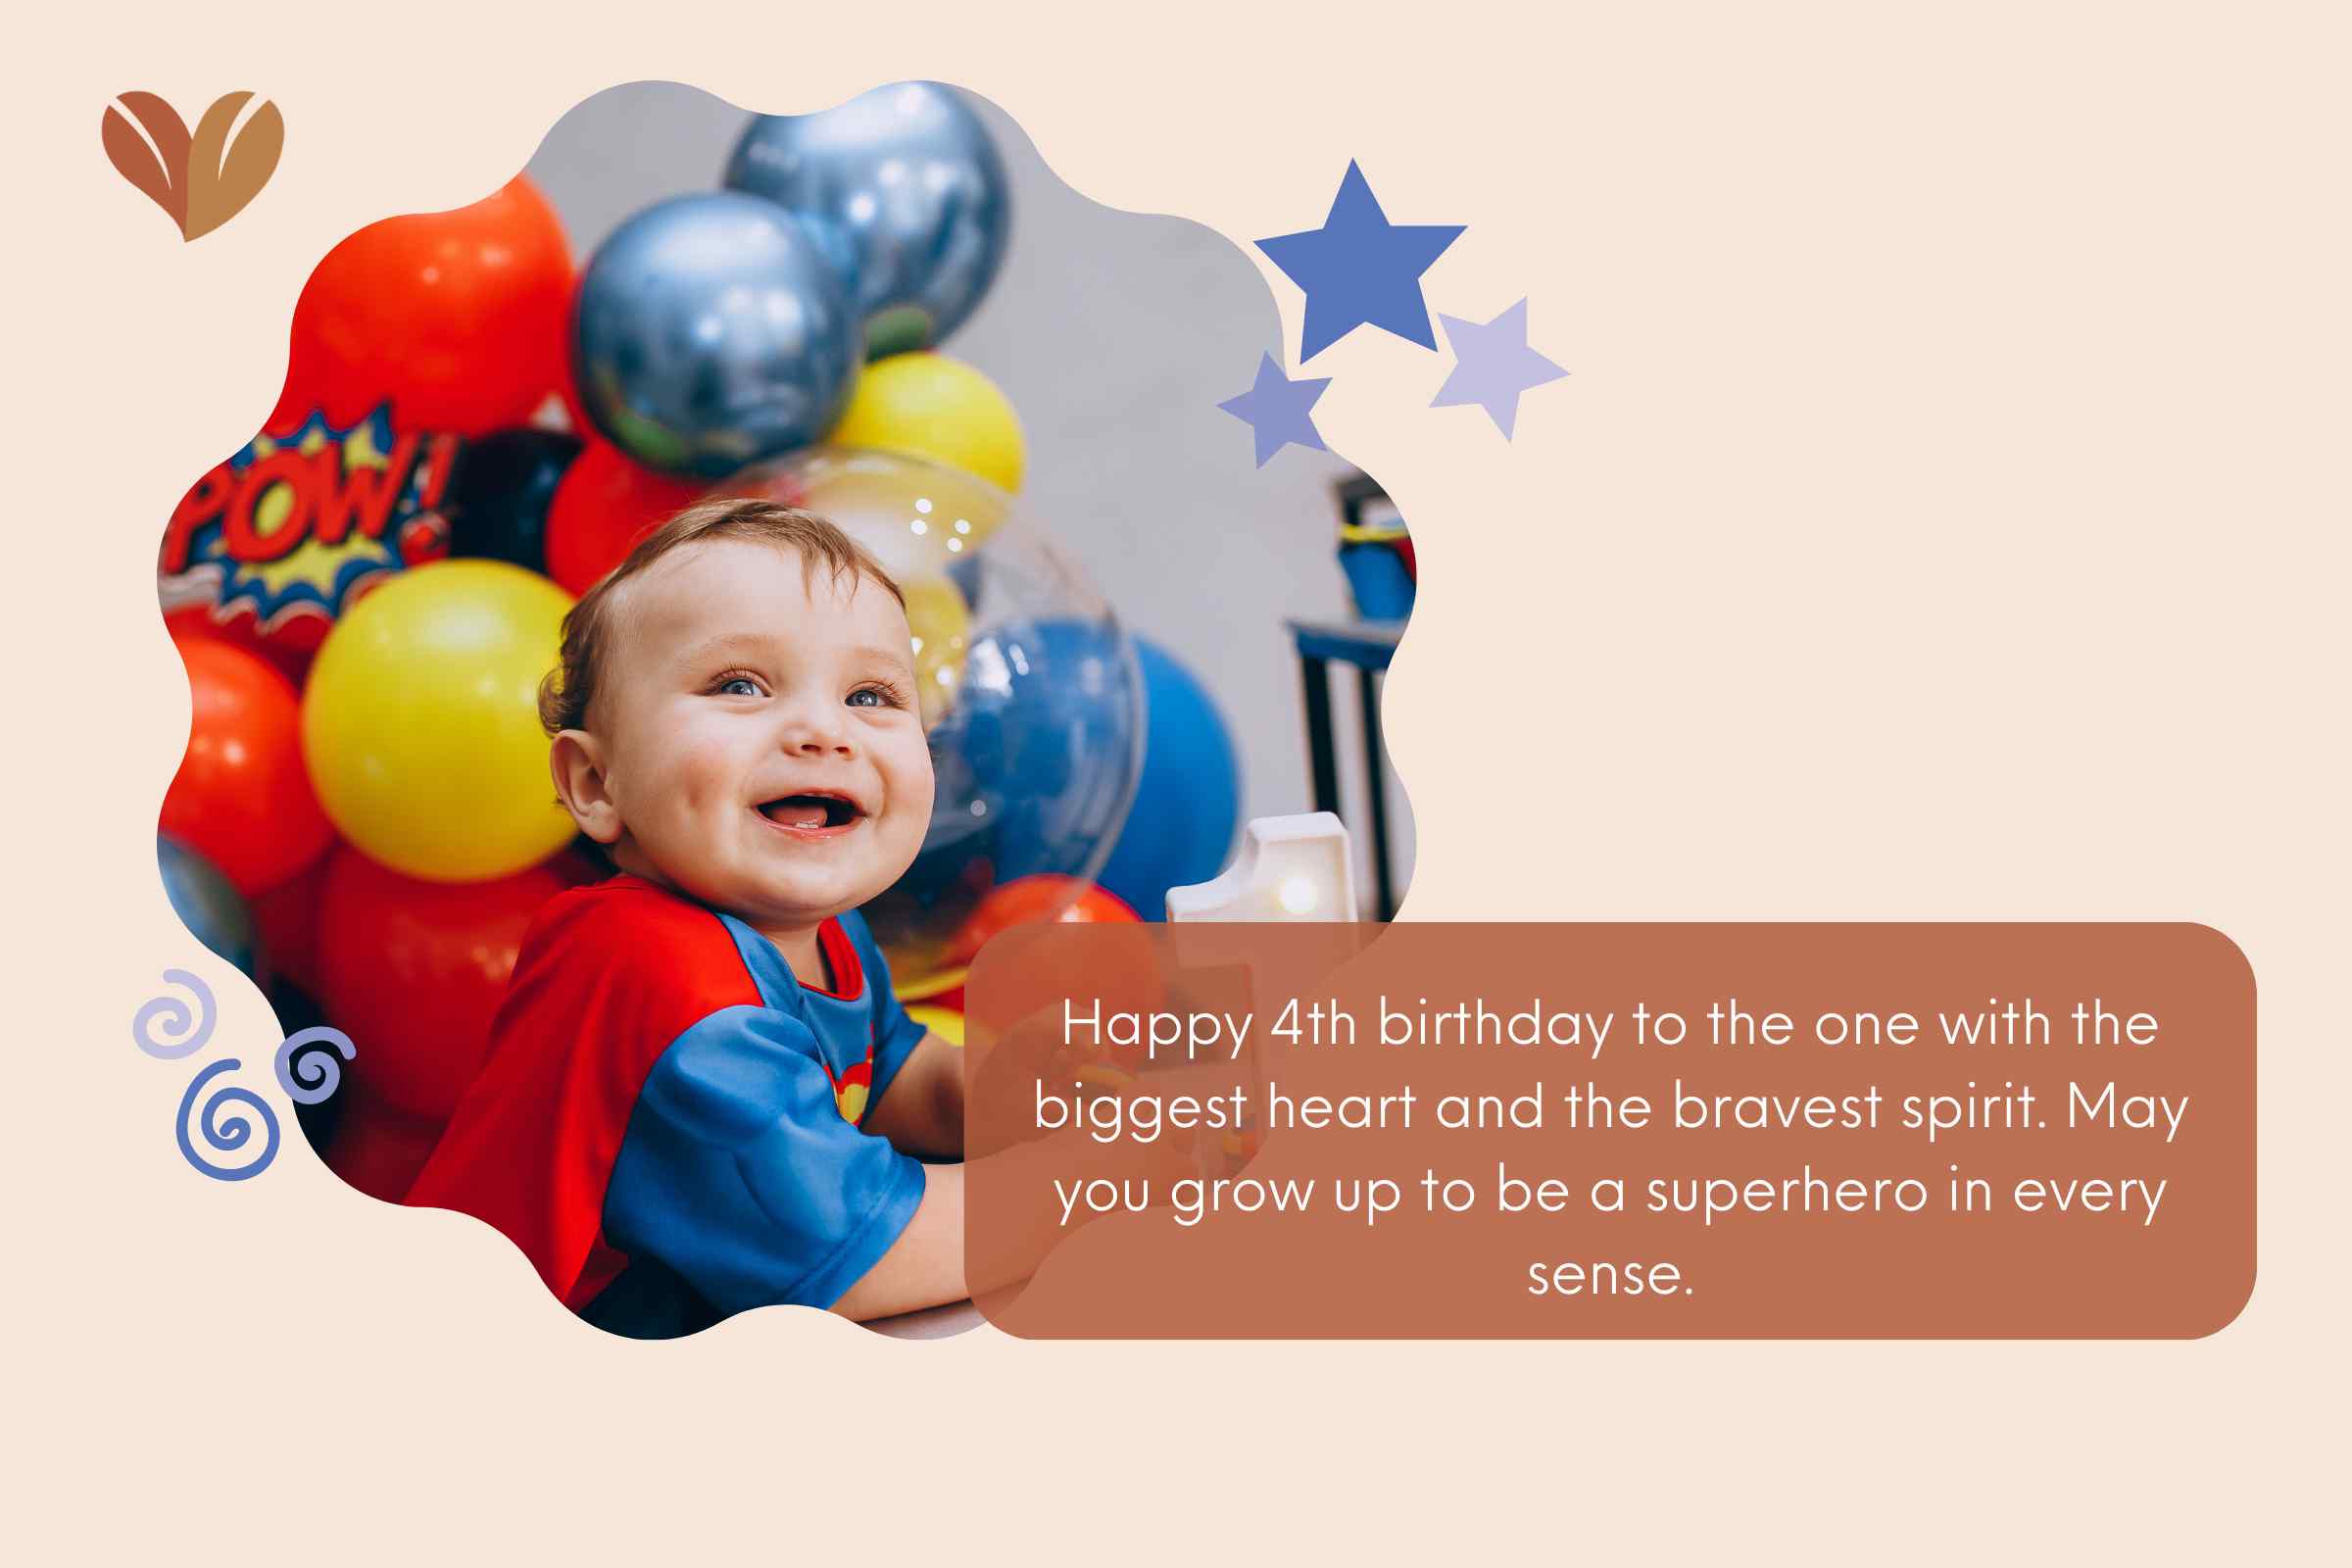 4th birthday wishes for your son